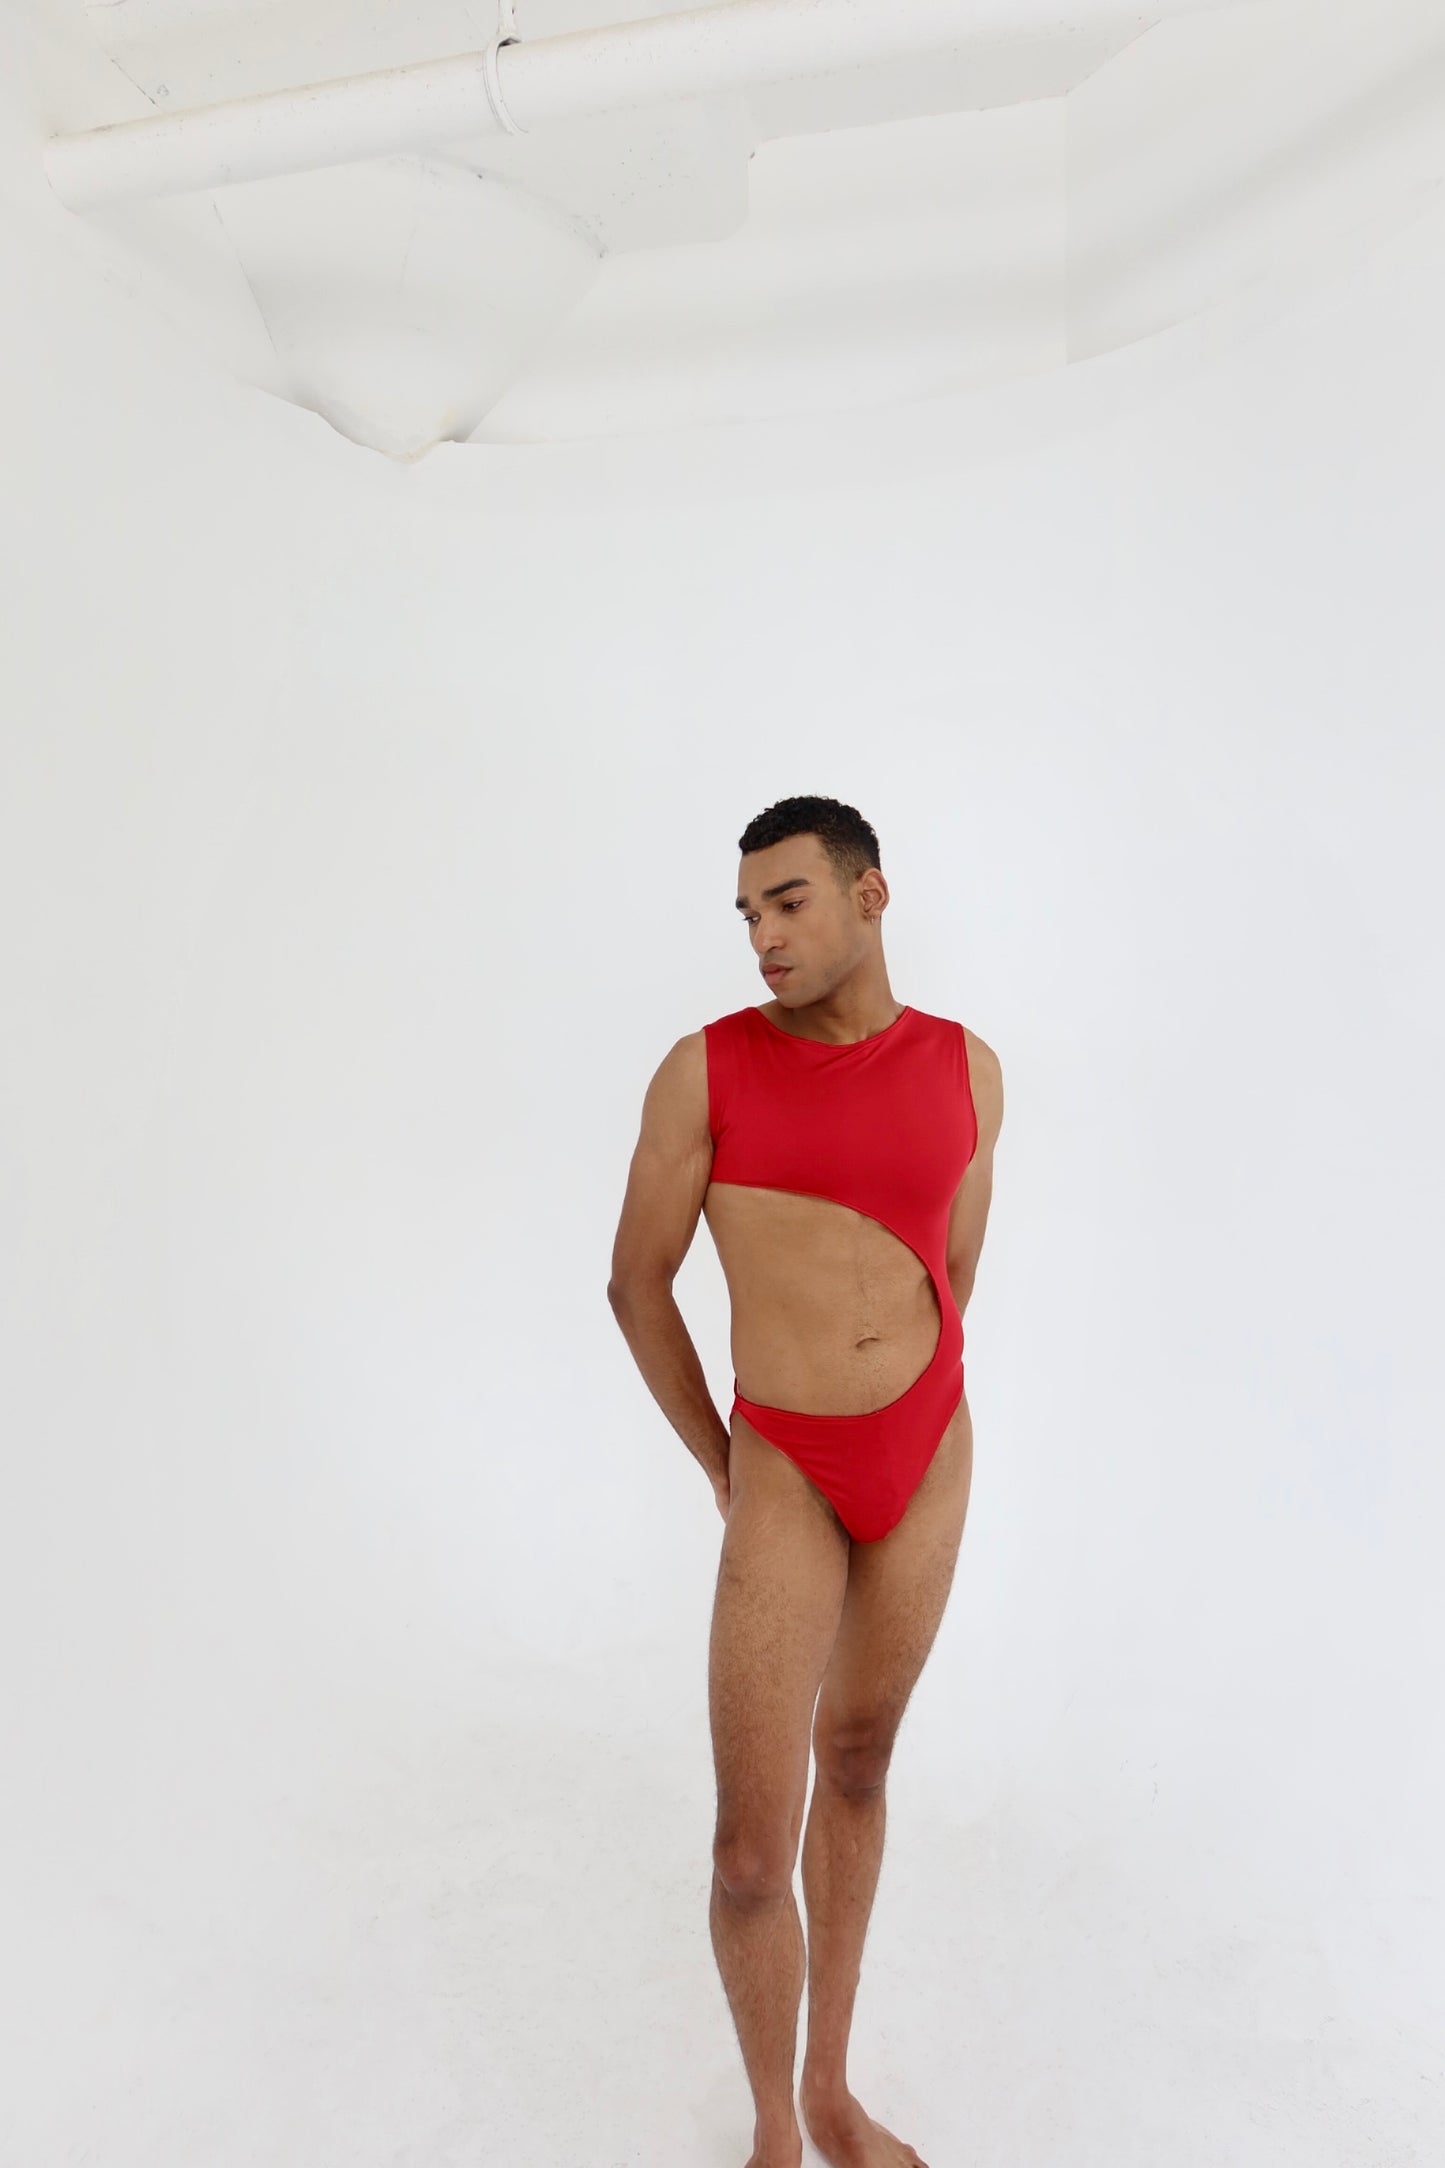 The Red Hot Cut Swimsuit